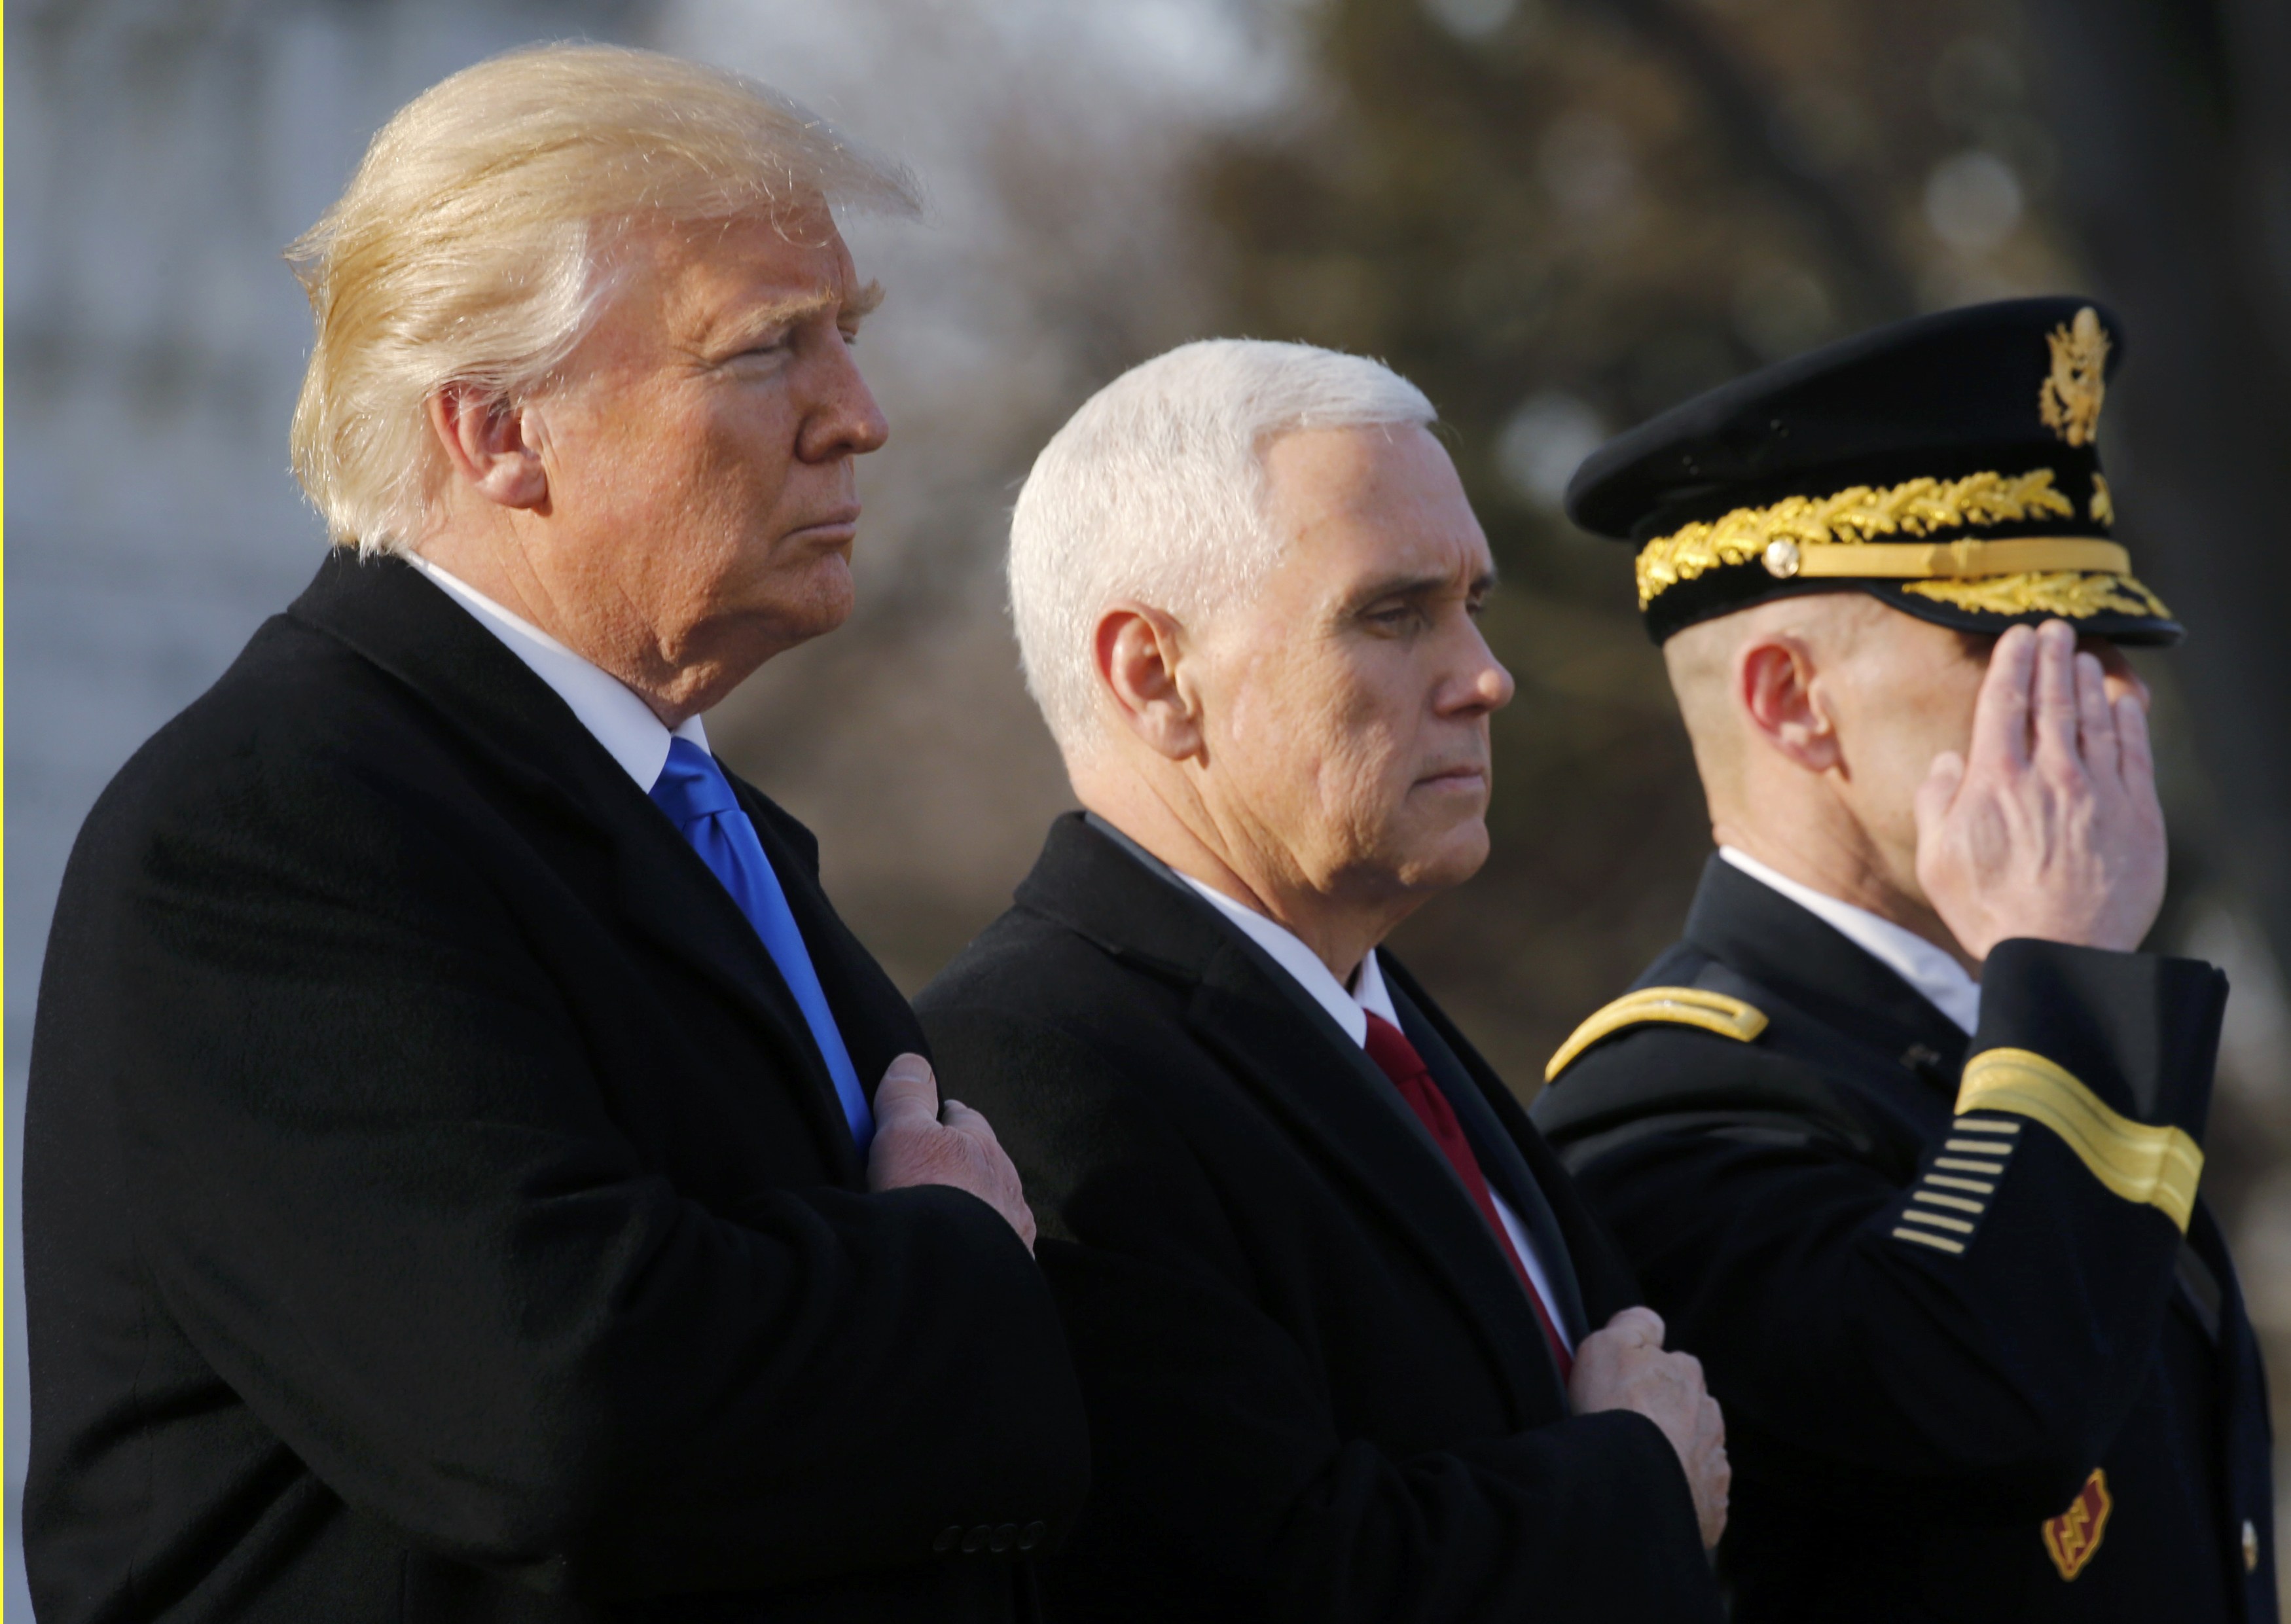 U.S. President-elect Donald Trump (L) and Vice President-elect Mike Pence (C) participate in a wreath laying ceremony at Arlington National Cemetery outside Washington, U.S., January 19, 2017, one day before Trump's inauguration as the nation's 45th president. REUTERS/Jonathan Ernst